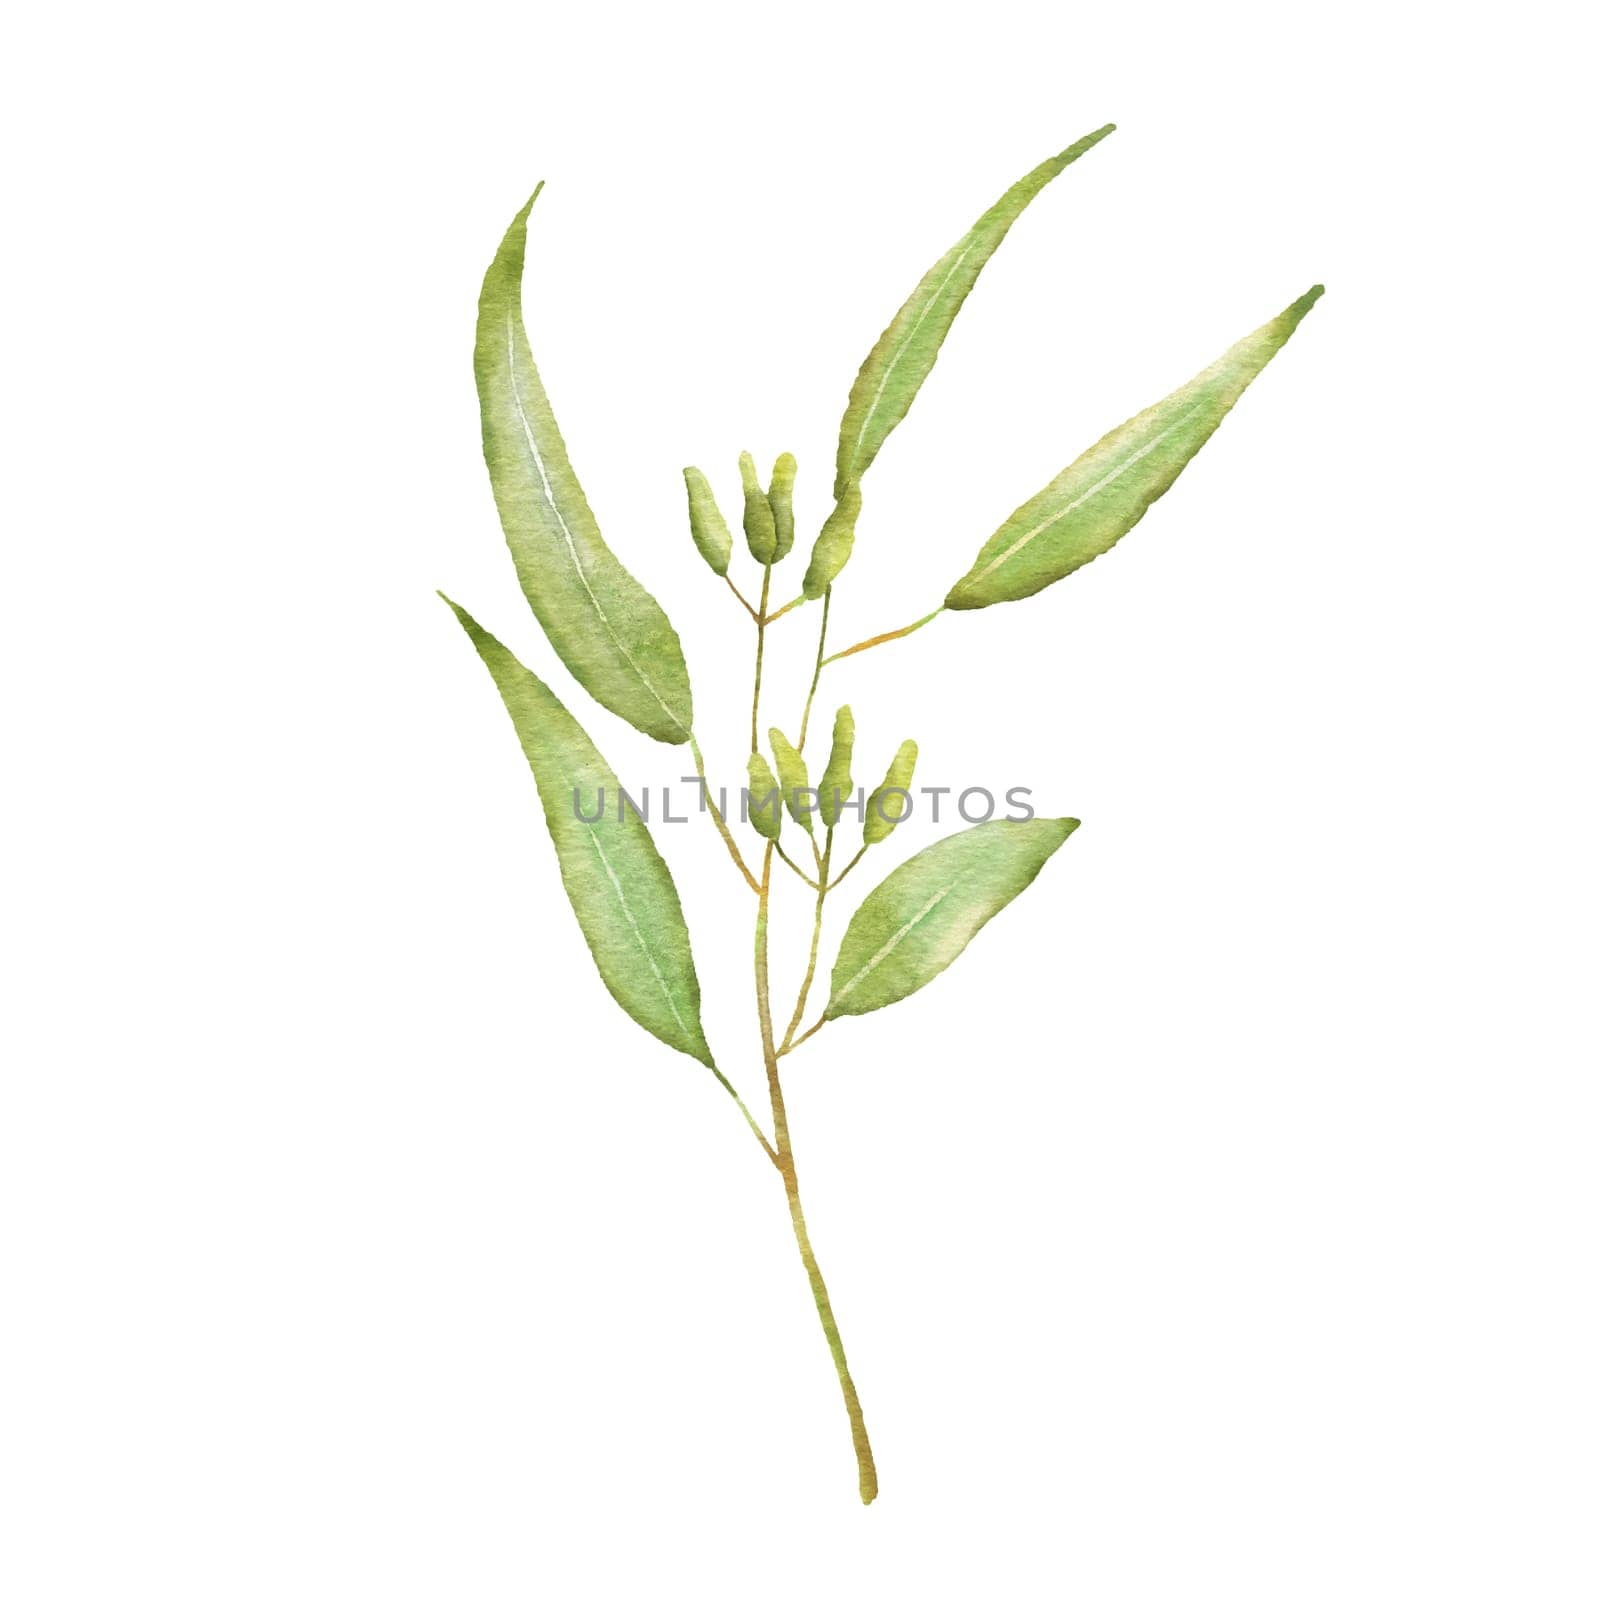 Watercolor Eucaliptus branch. Hand drawn illustration with eucalyptus leaves isolated on white background. Floral herbal image of green plant.